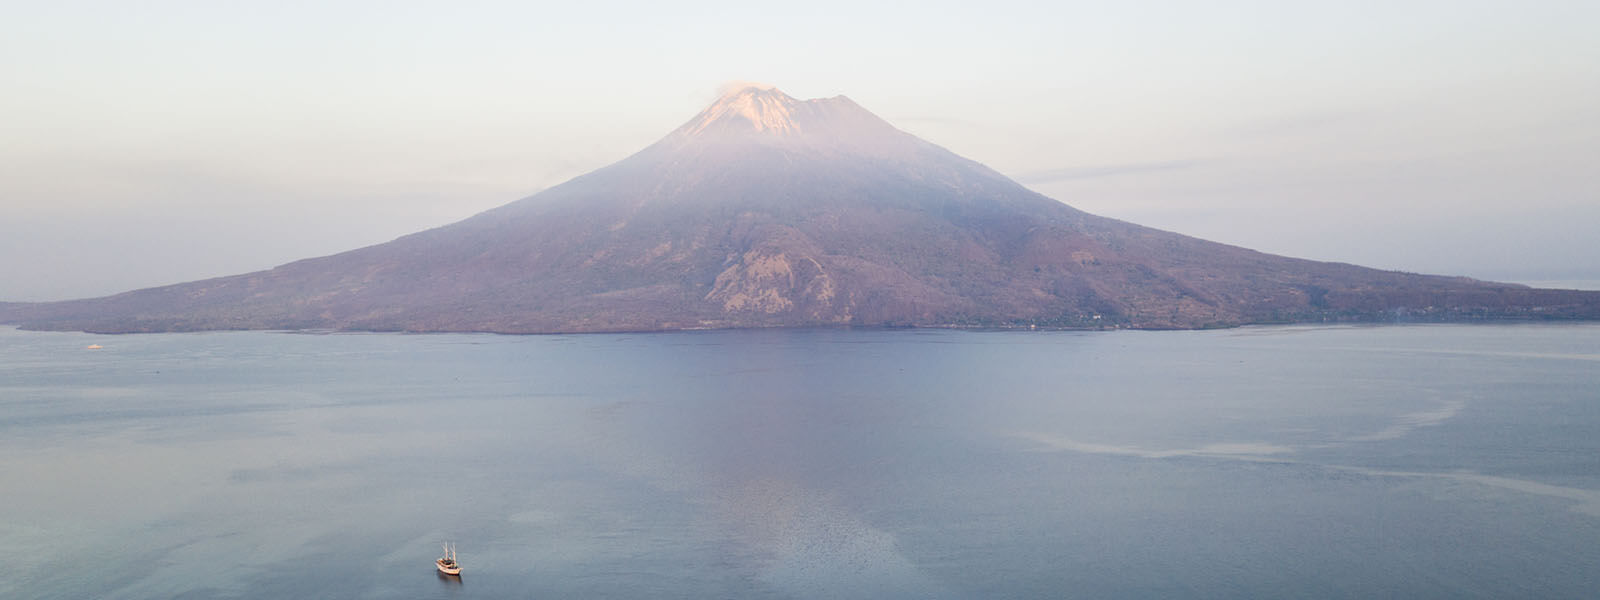 Gunung Api in the Banda Islands - we see this on our Banda Islands snorkeling tour